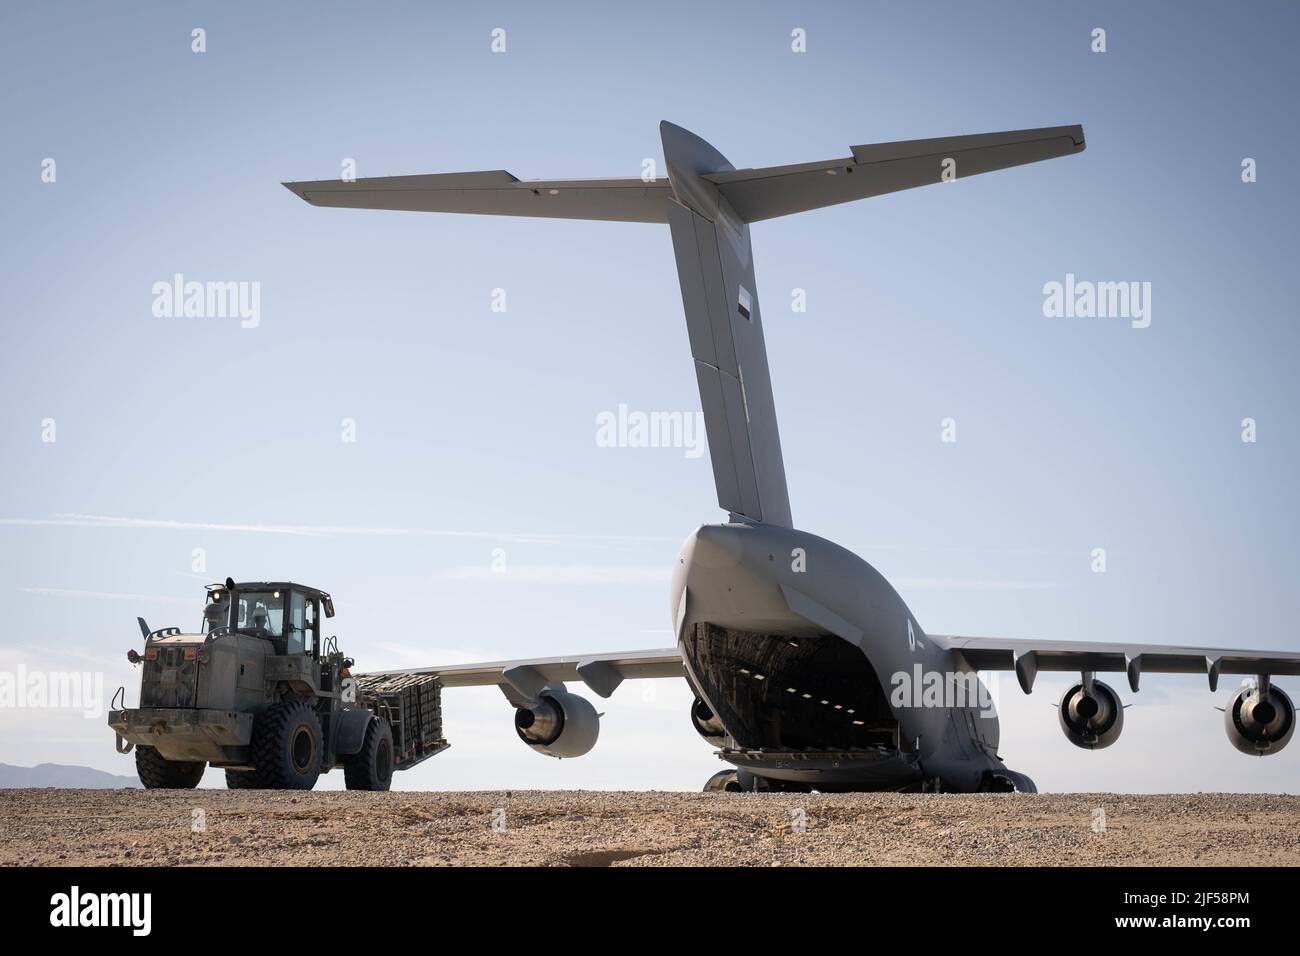 A U.S. Marine Corps TX51-19MD forklift loads a pallet of ammunition into a C-17 Globemaster aircraft, 16th Strategic Airlift Squadron, United Arab Emirates Air Force, at the Strategic Expeditionary Landing Field during an ammunition retrograde on Marine Corps Air Ground Combat Center, Twentynine Palms, California, Feb. 25, 2022. The U.S. Marine Corps and UAE maintain a close relationship through persistent bilateral training engagements and programs, enhancing each other’s ability to conduct counterterrorism operations, protect critical infrastructure, and support national defense.  (U.S. Mari Stock Photo